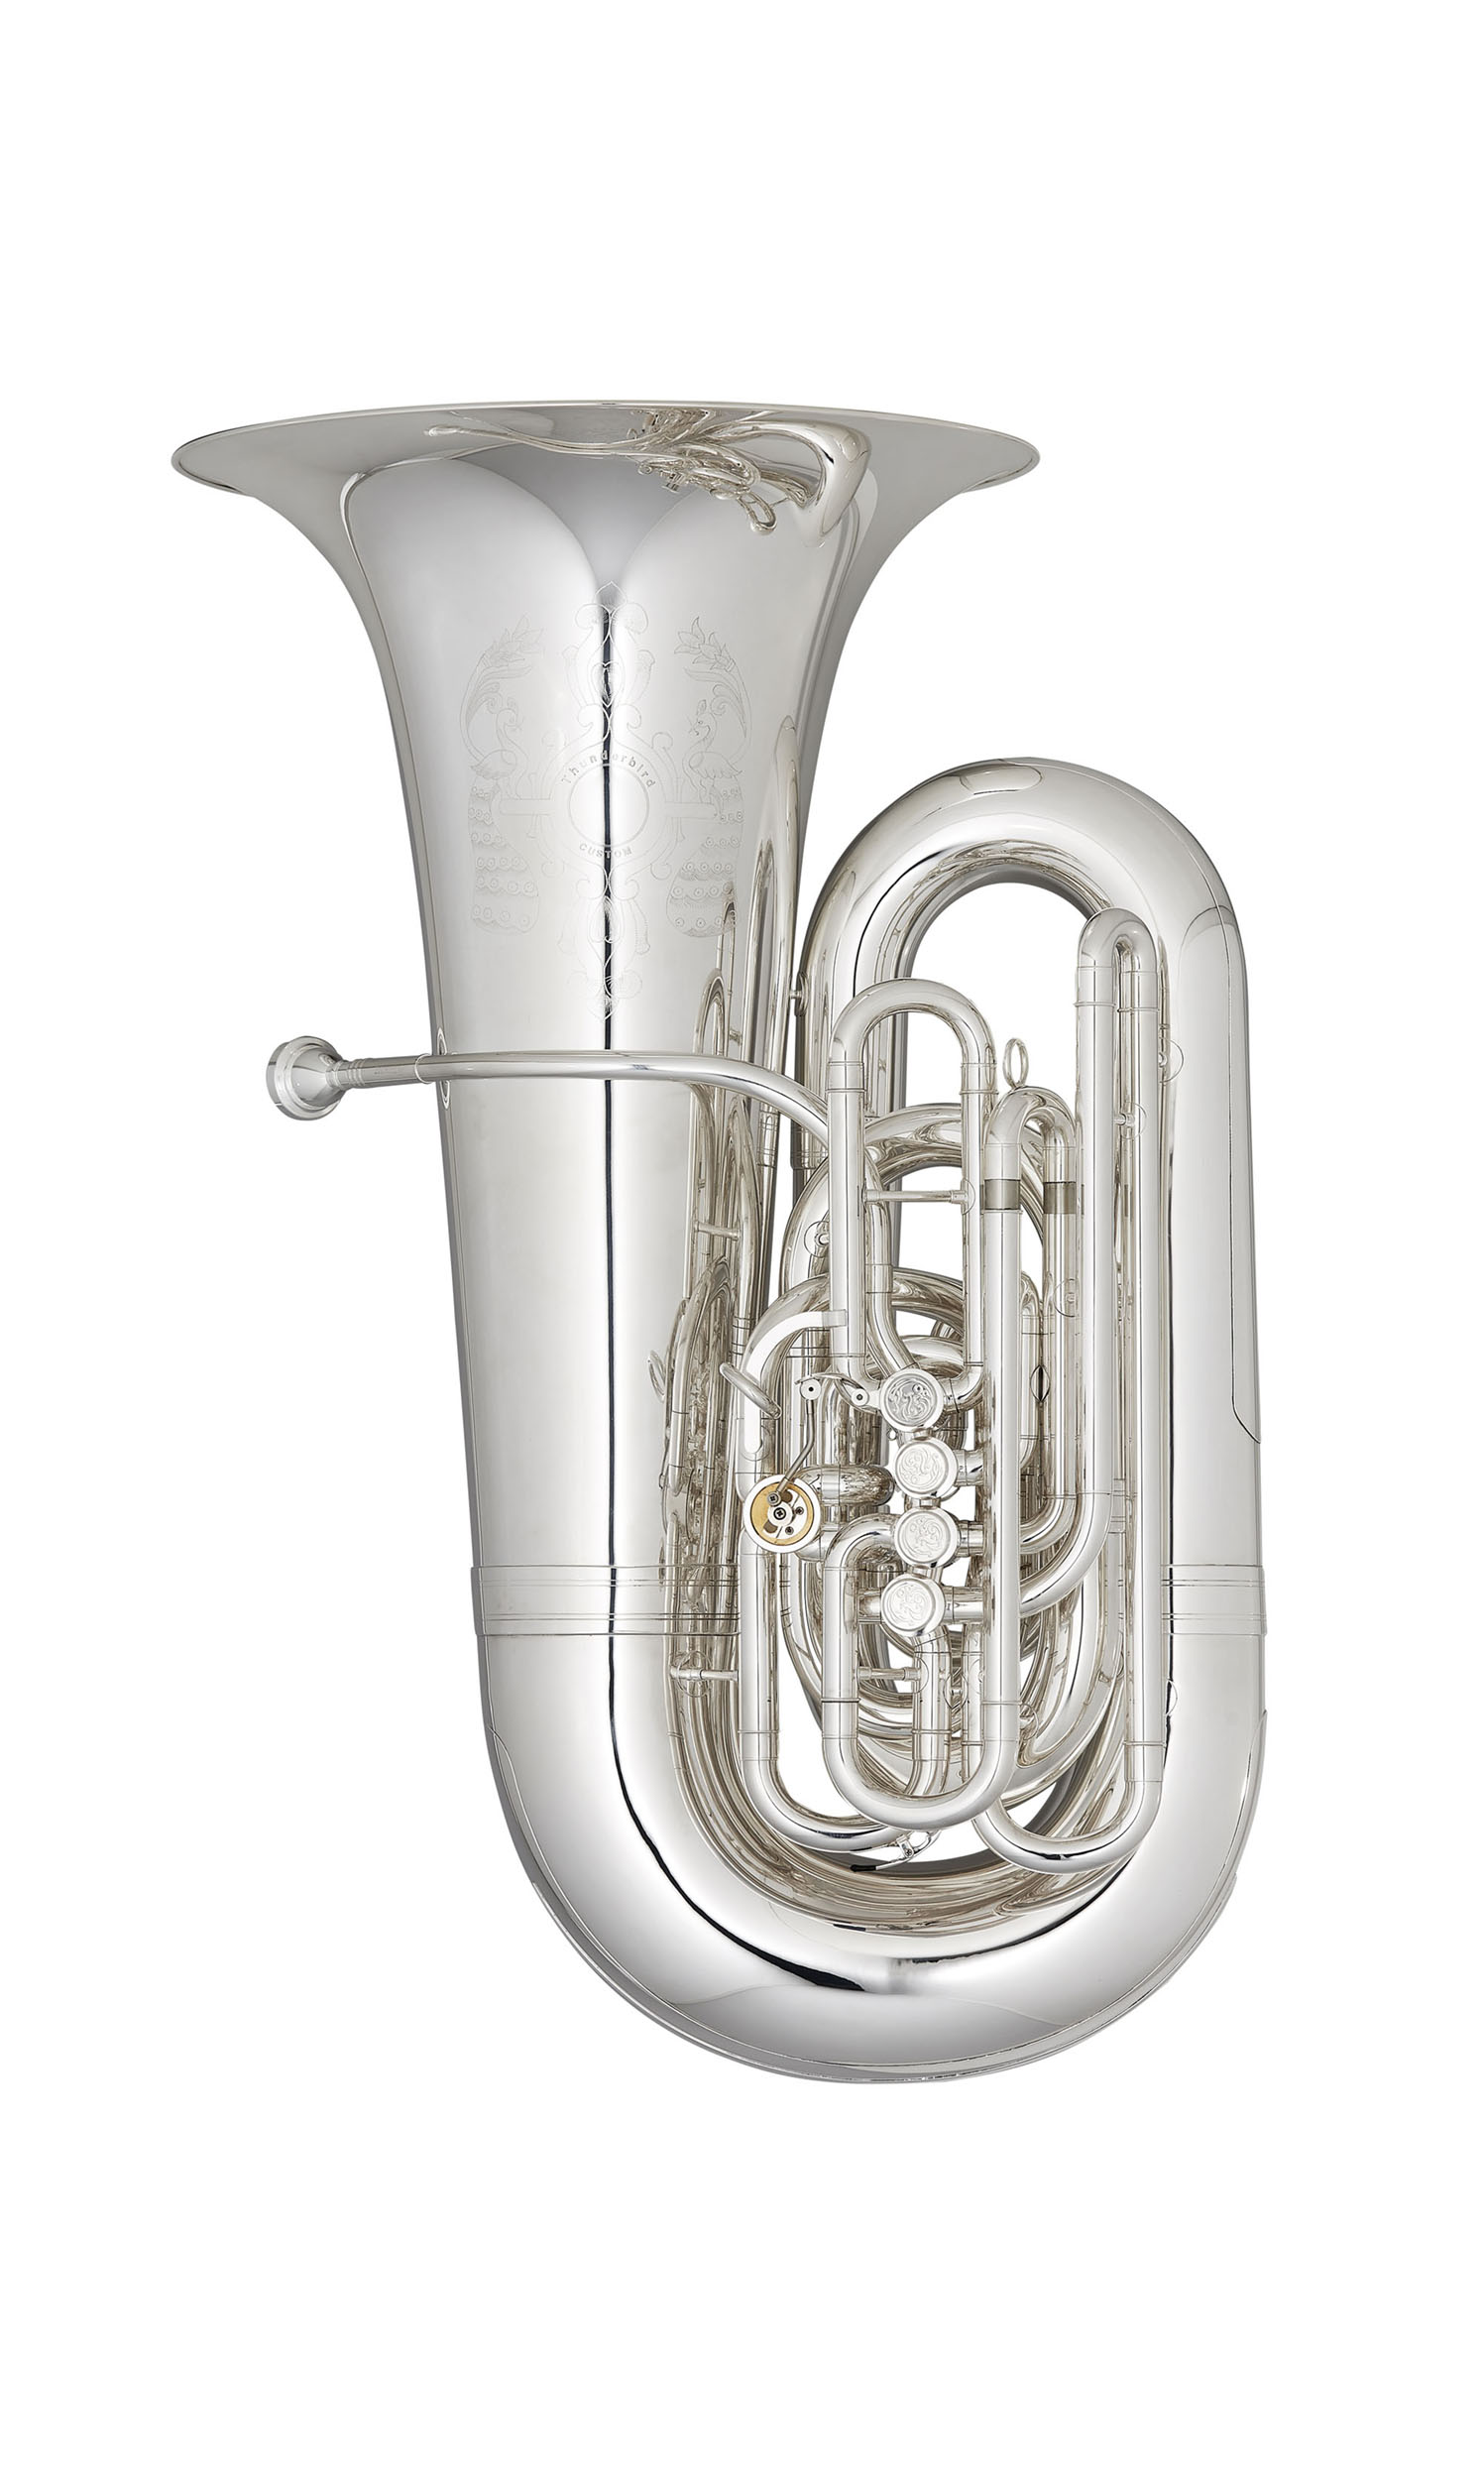 Euphonium-Tuba and General Music Forums